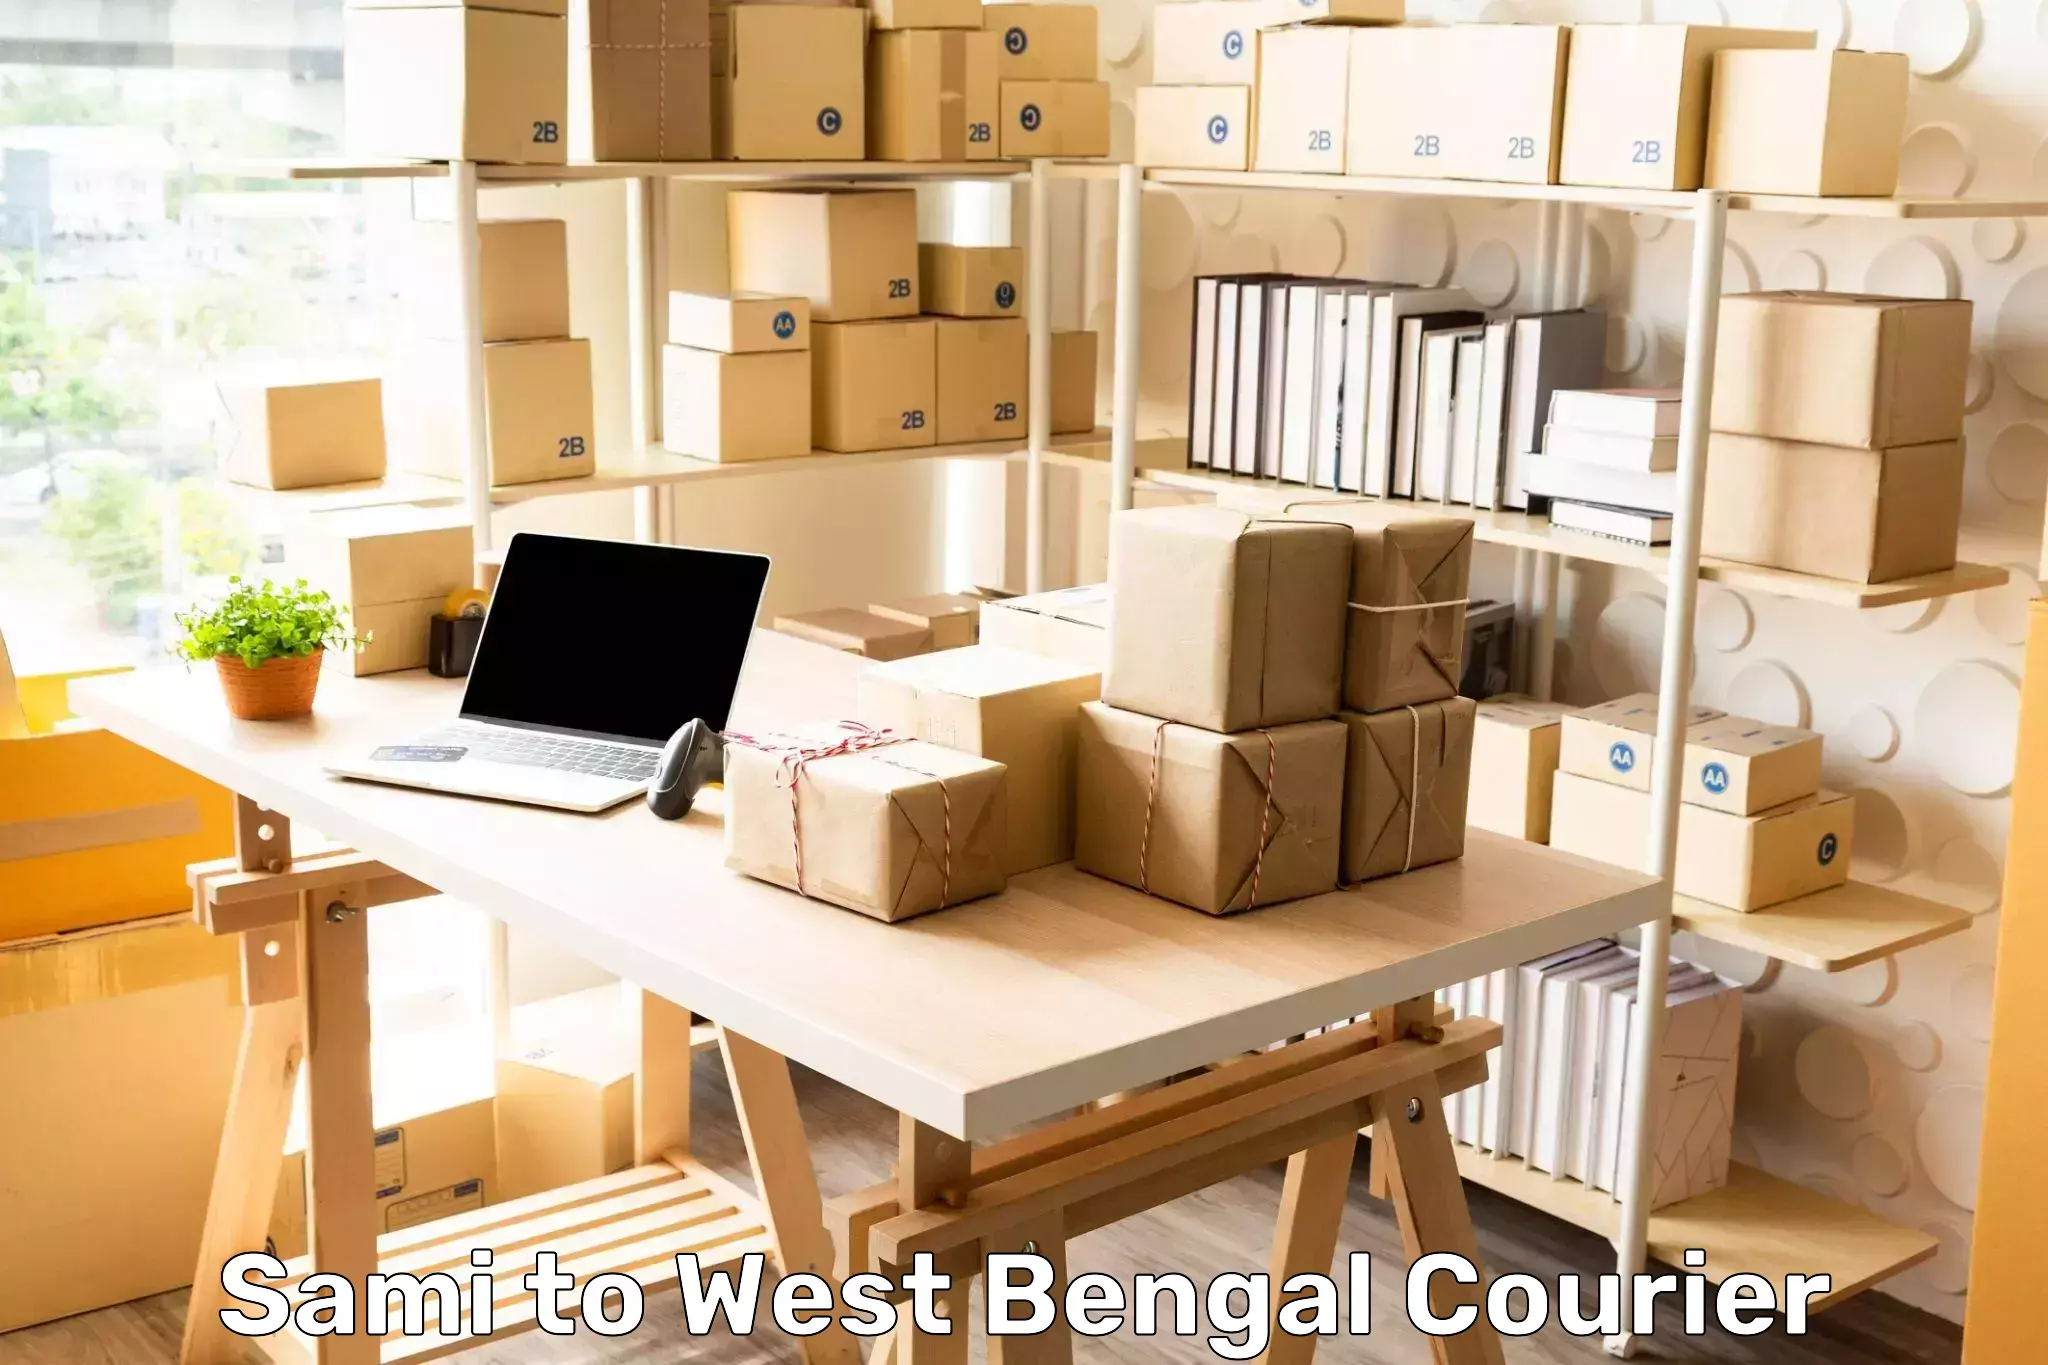 24-hour courier services Sami to West Bengal